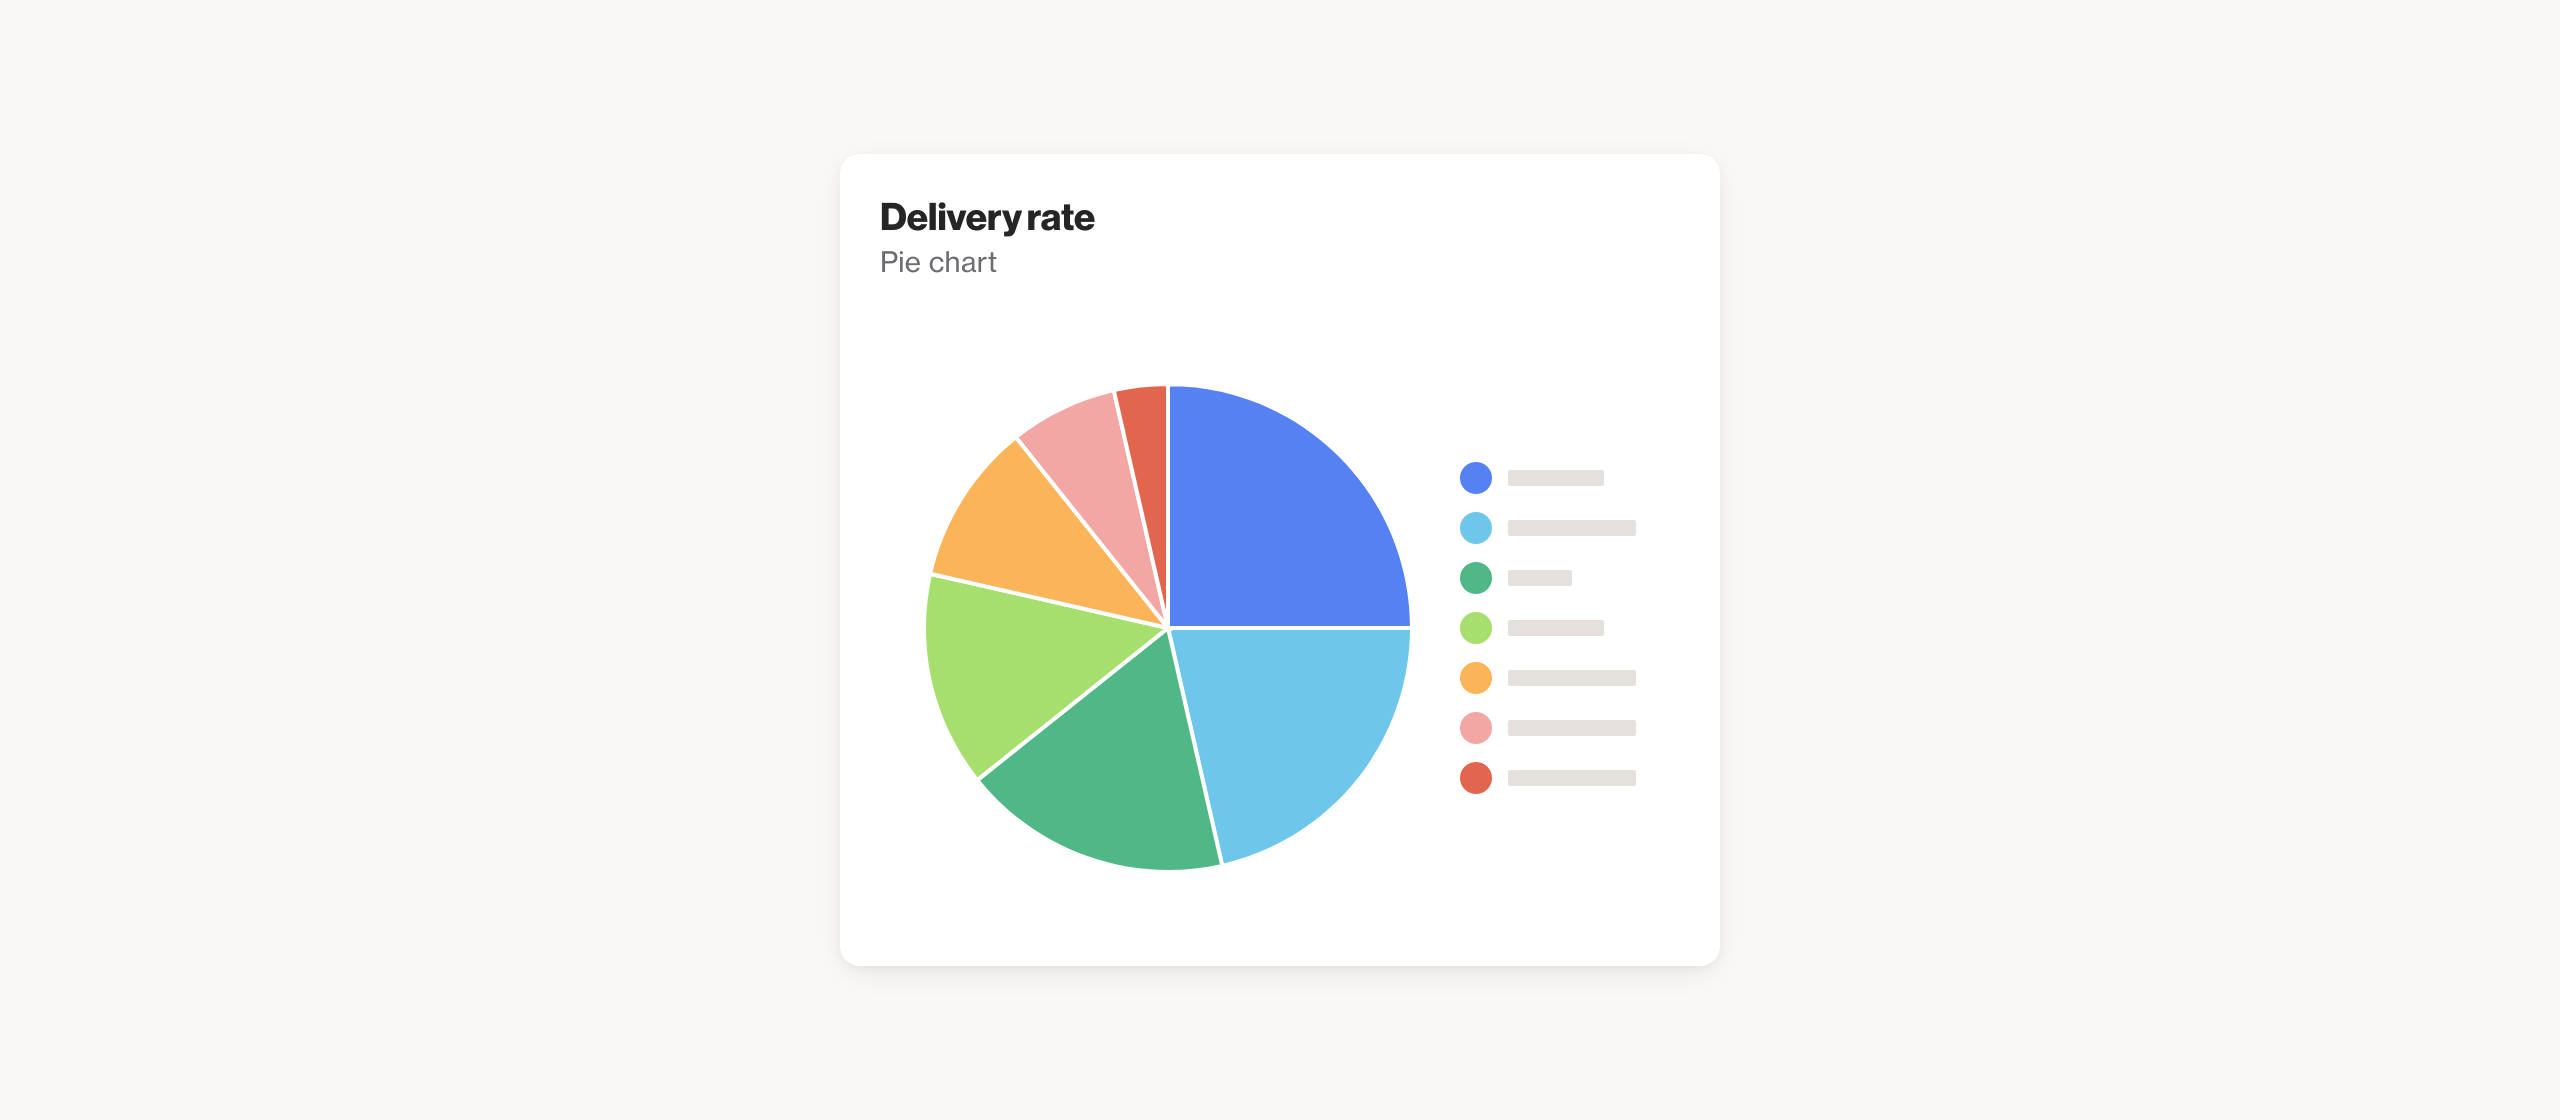 Global delivery rate